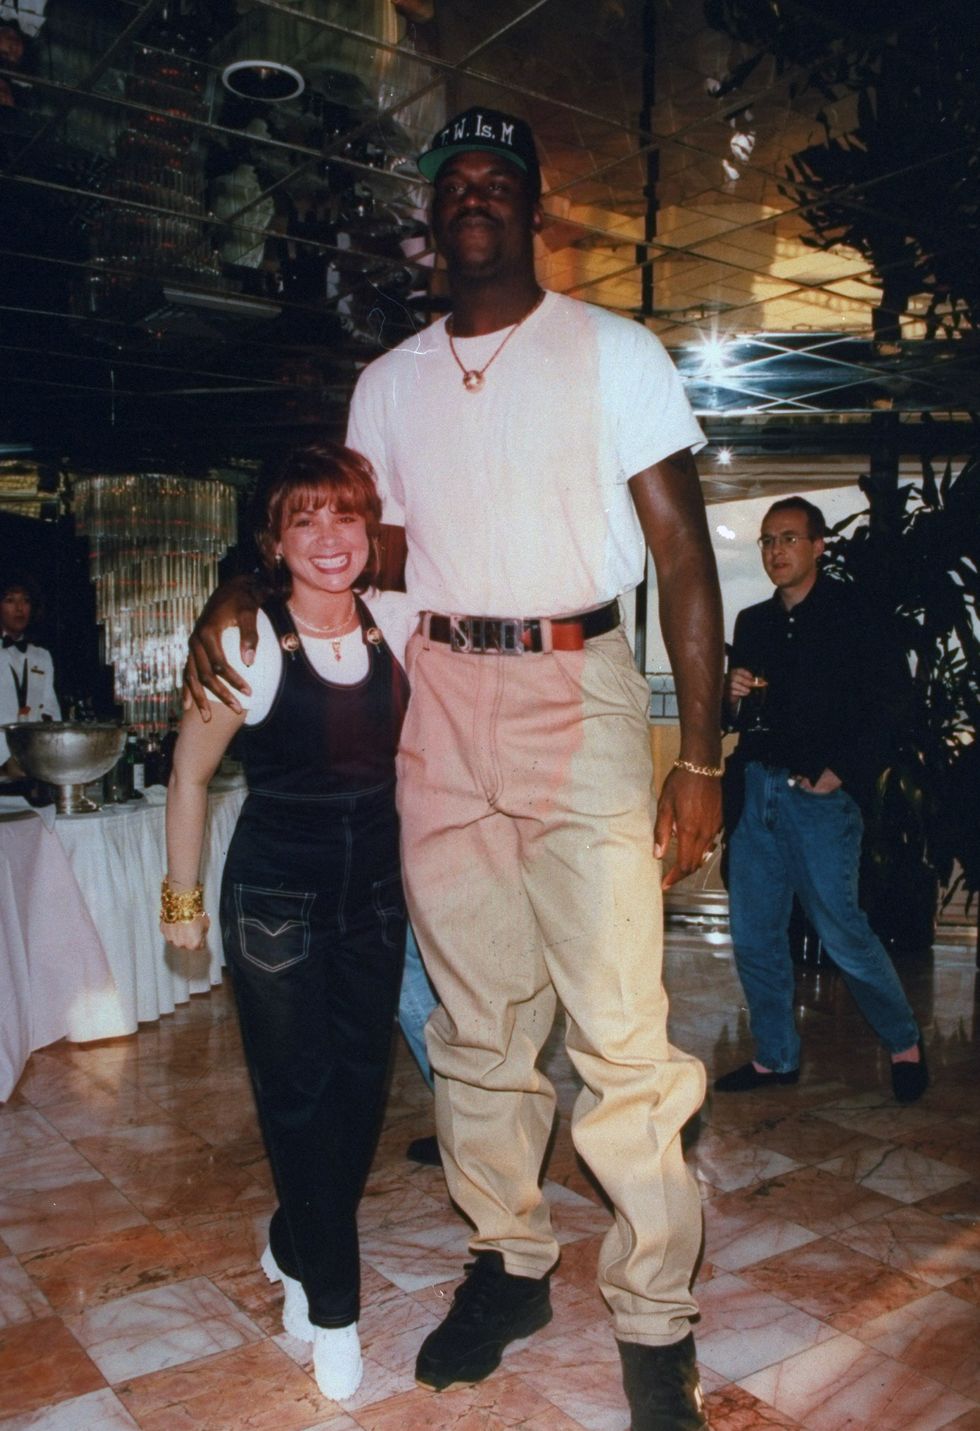 singer paula abdul  orlando magic basketball player shaquille o'neal posing at opening of planet hollywood  photo by albert ferreiradmithe life picture collection via getty images